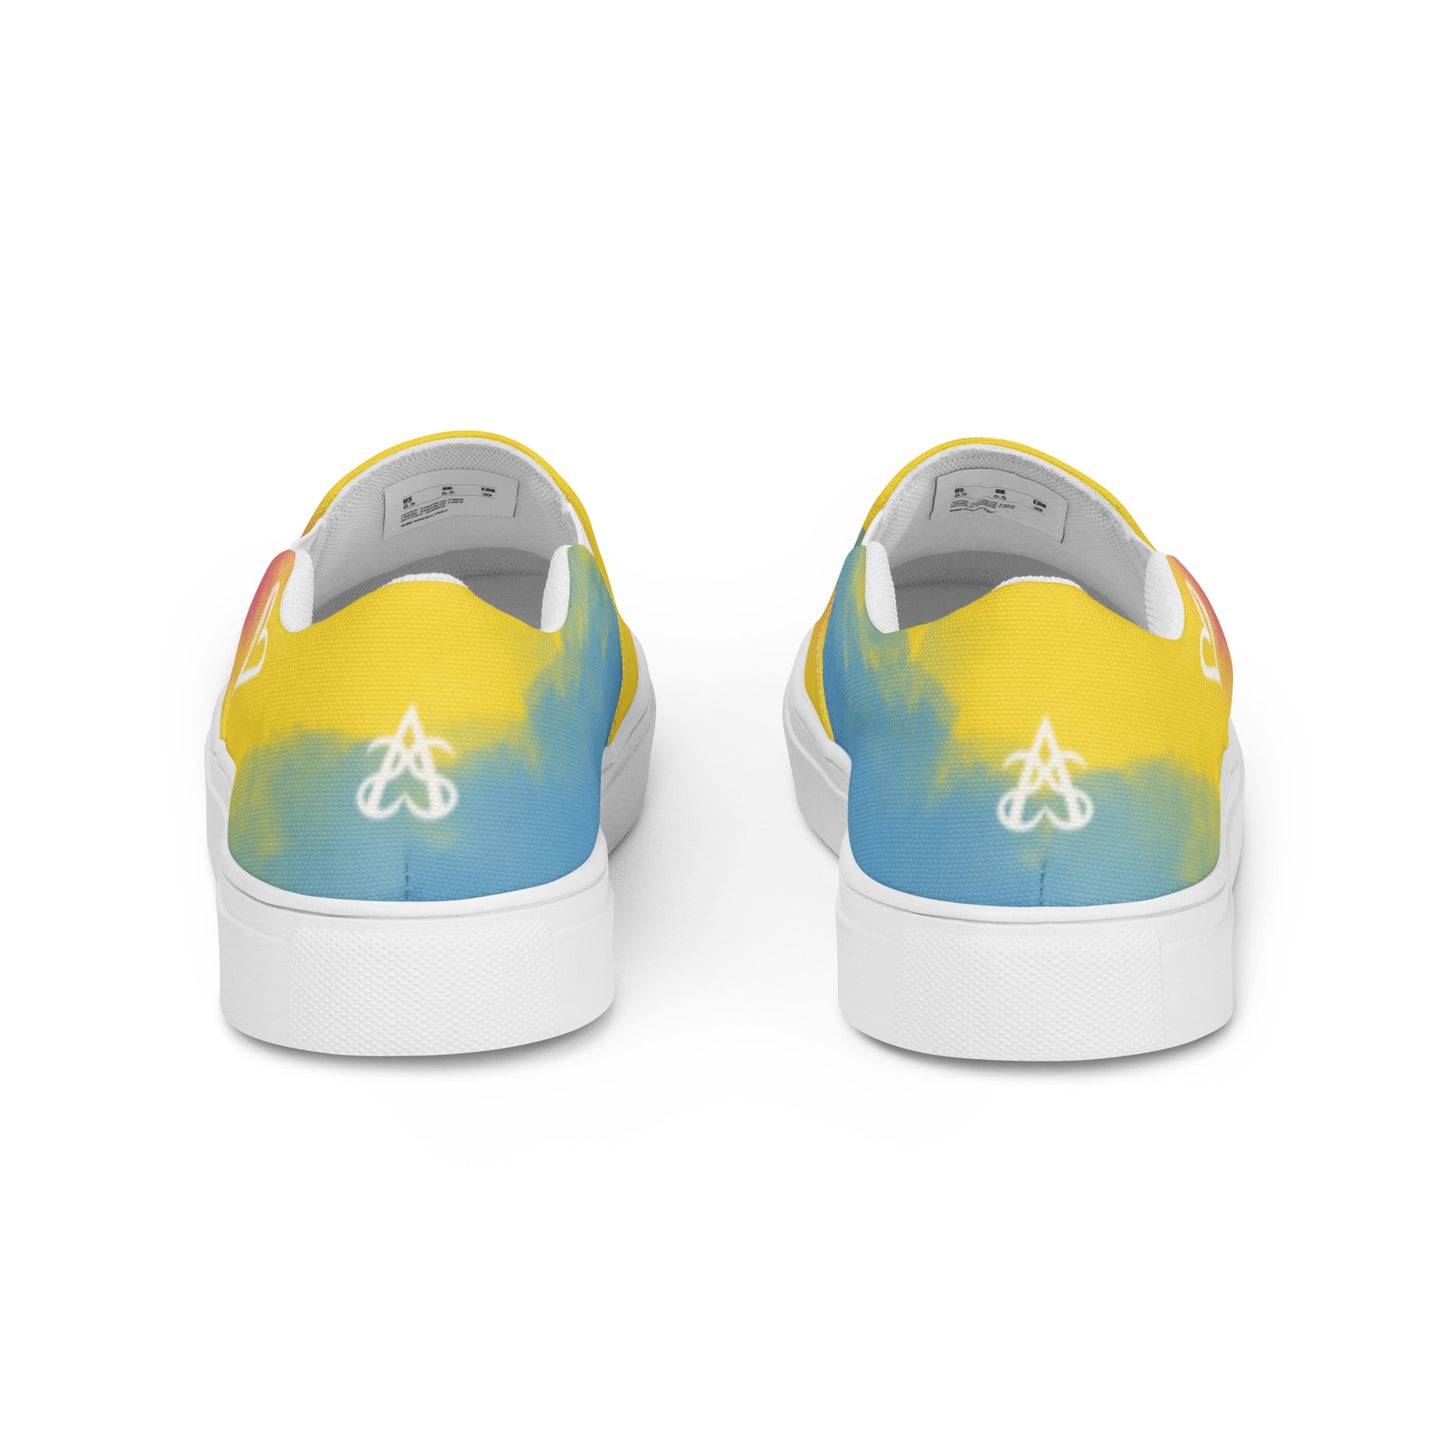 Back view: a pair of slip on shoes with color block pink, yellow, and blue clouds, a white hand drawn heart, and the Aras Sivad logo on the back.